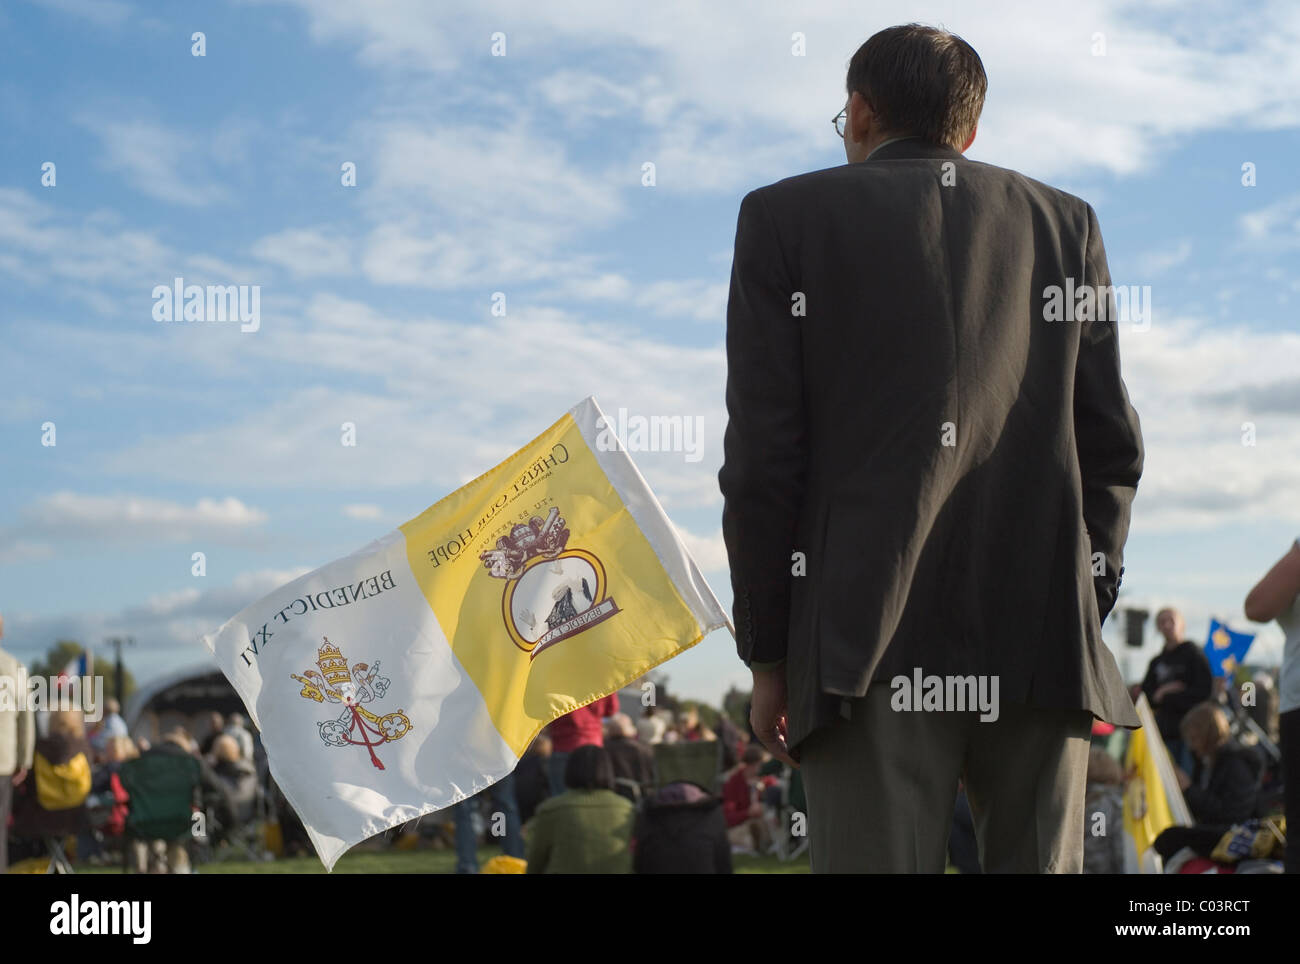 A man cheering the Pope in Hyde Park holding a Vatican flag, London 2010 Stock Photo